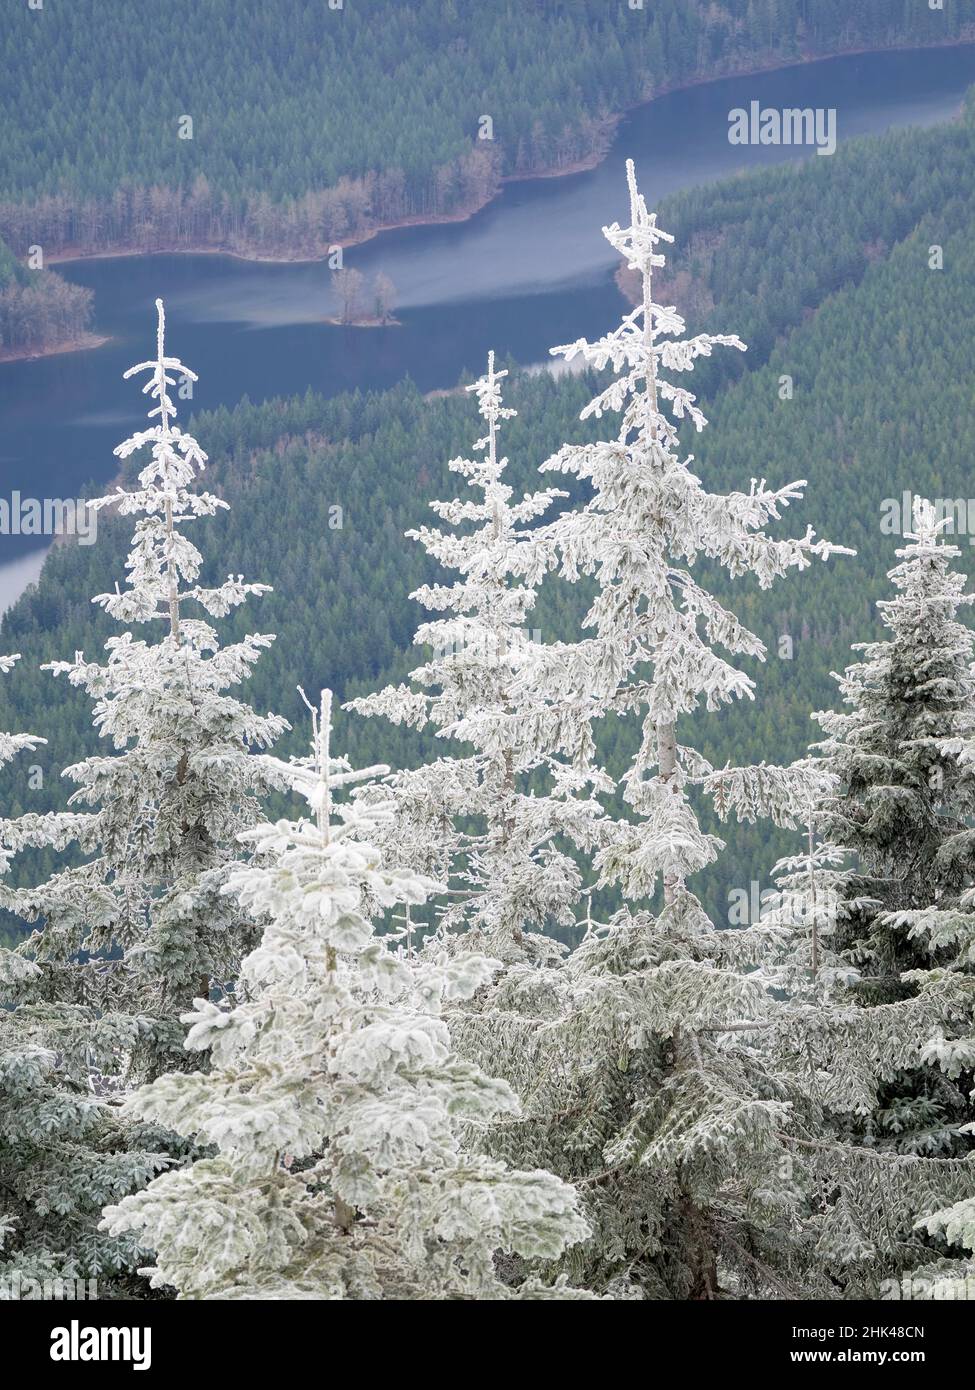 USA, Washington State. Central Cascades, frost covered fir trees. Stock Photo